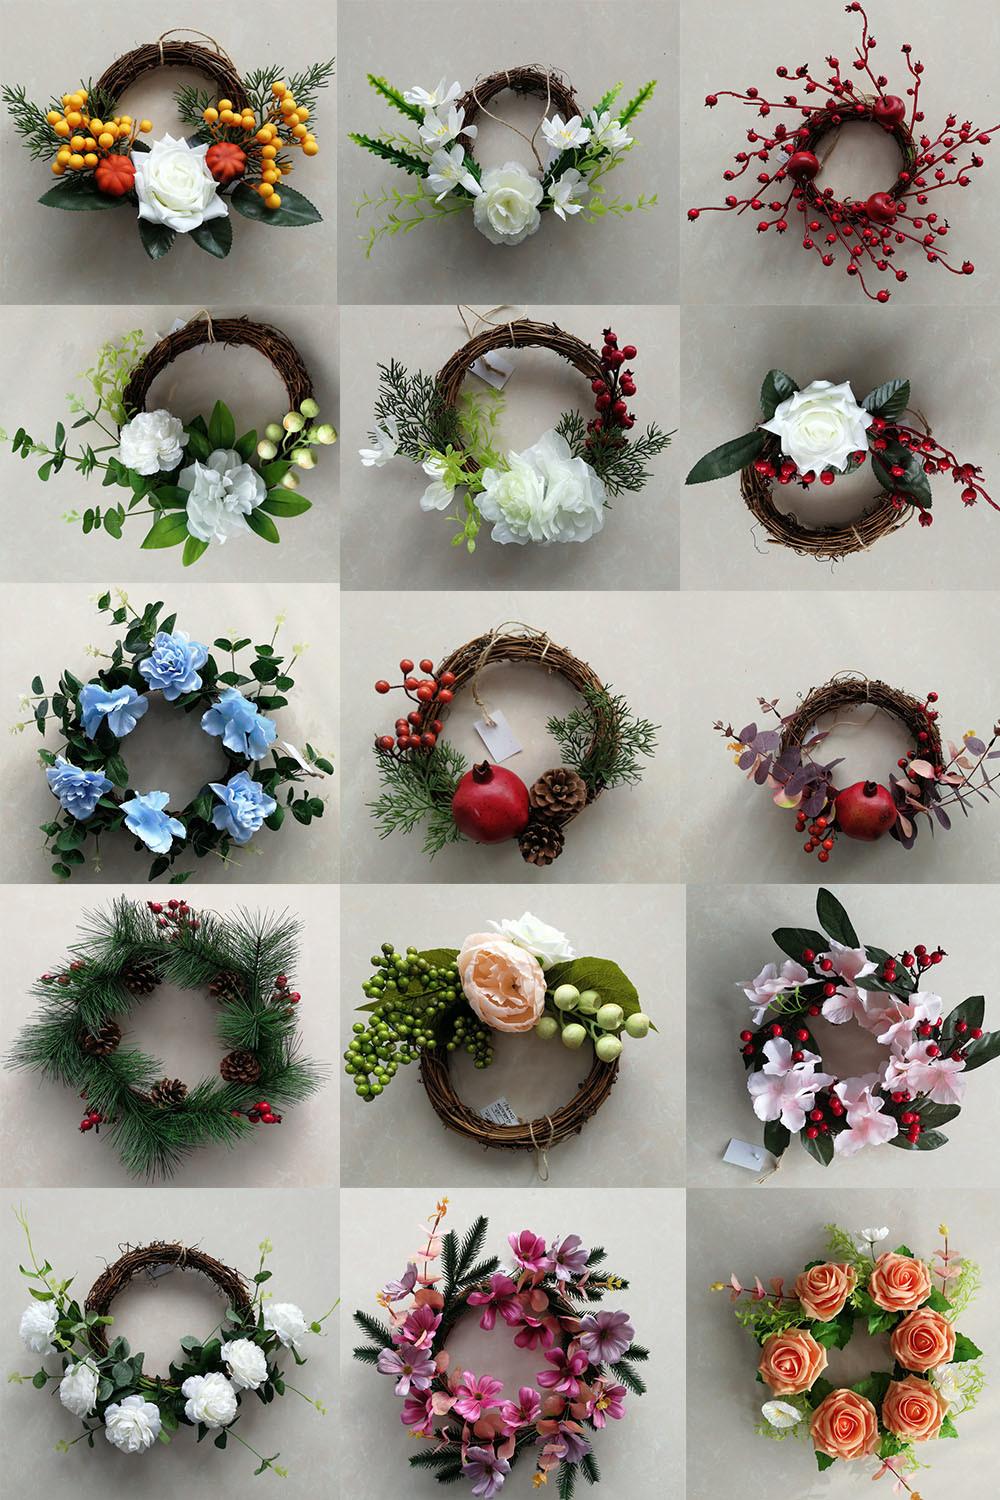 24inch Wreath with Red Berry and Pinecone Wreath Christmas Decoration